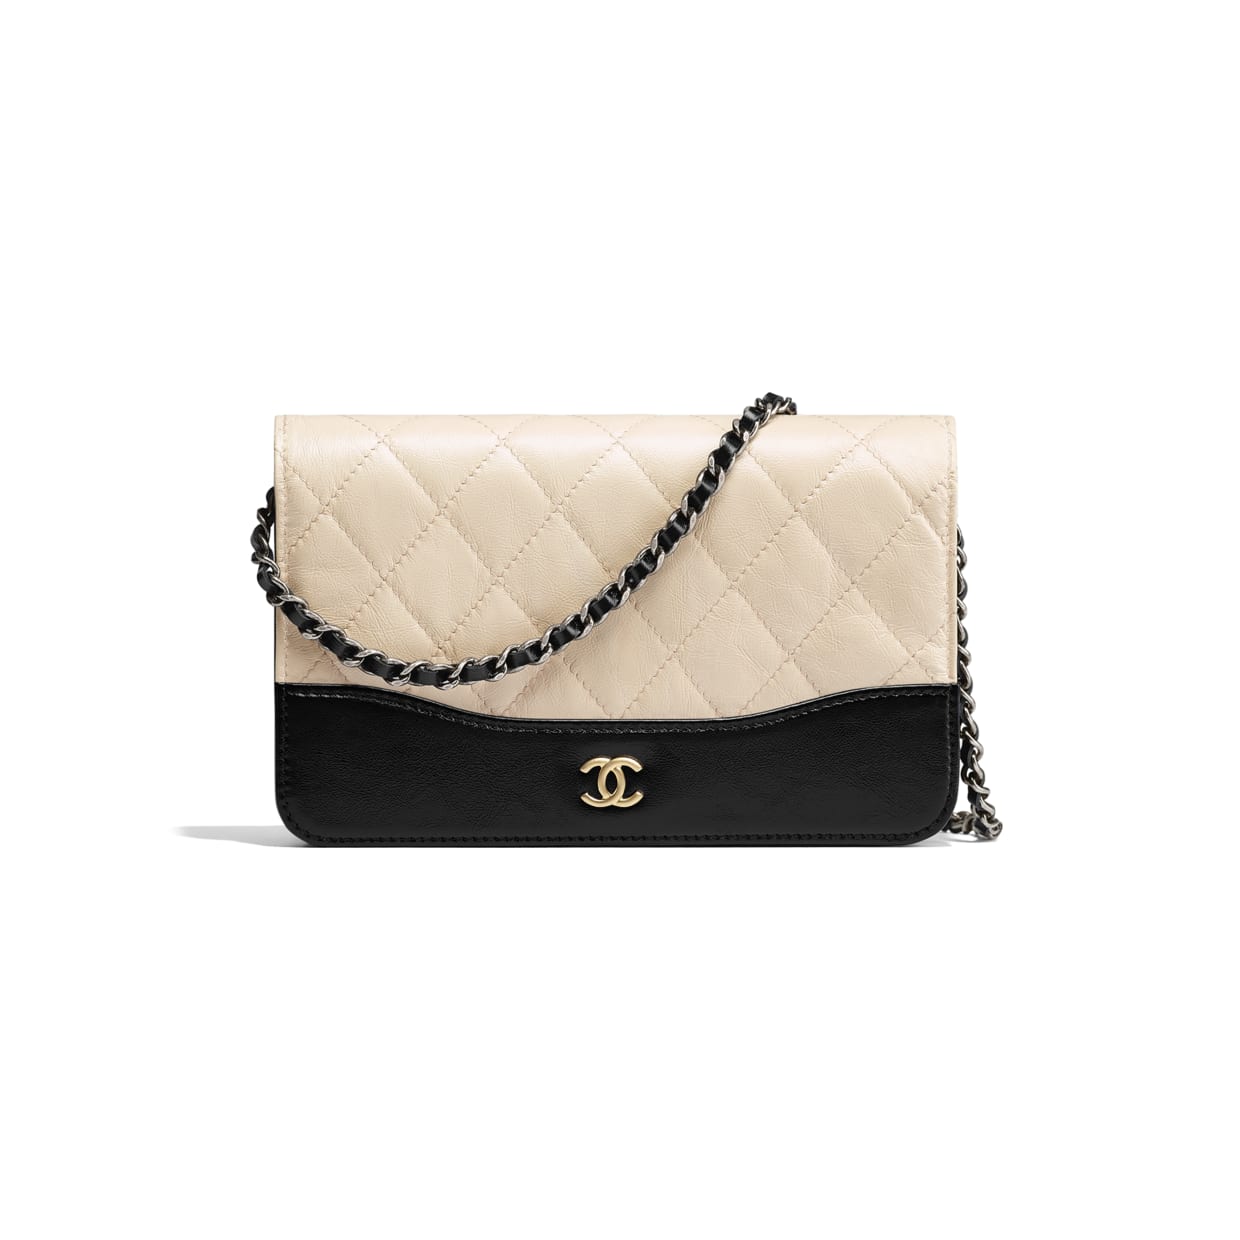 Chanel Métiers d'Art Pre-Fall 2020 Small Leather Goods Collection 